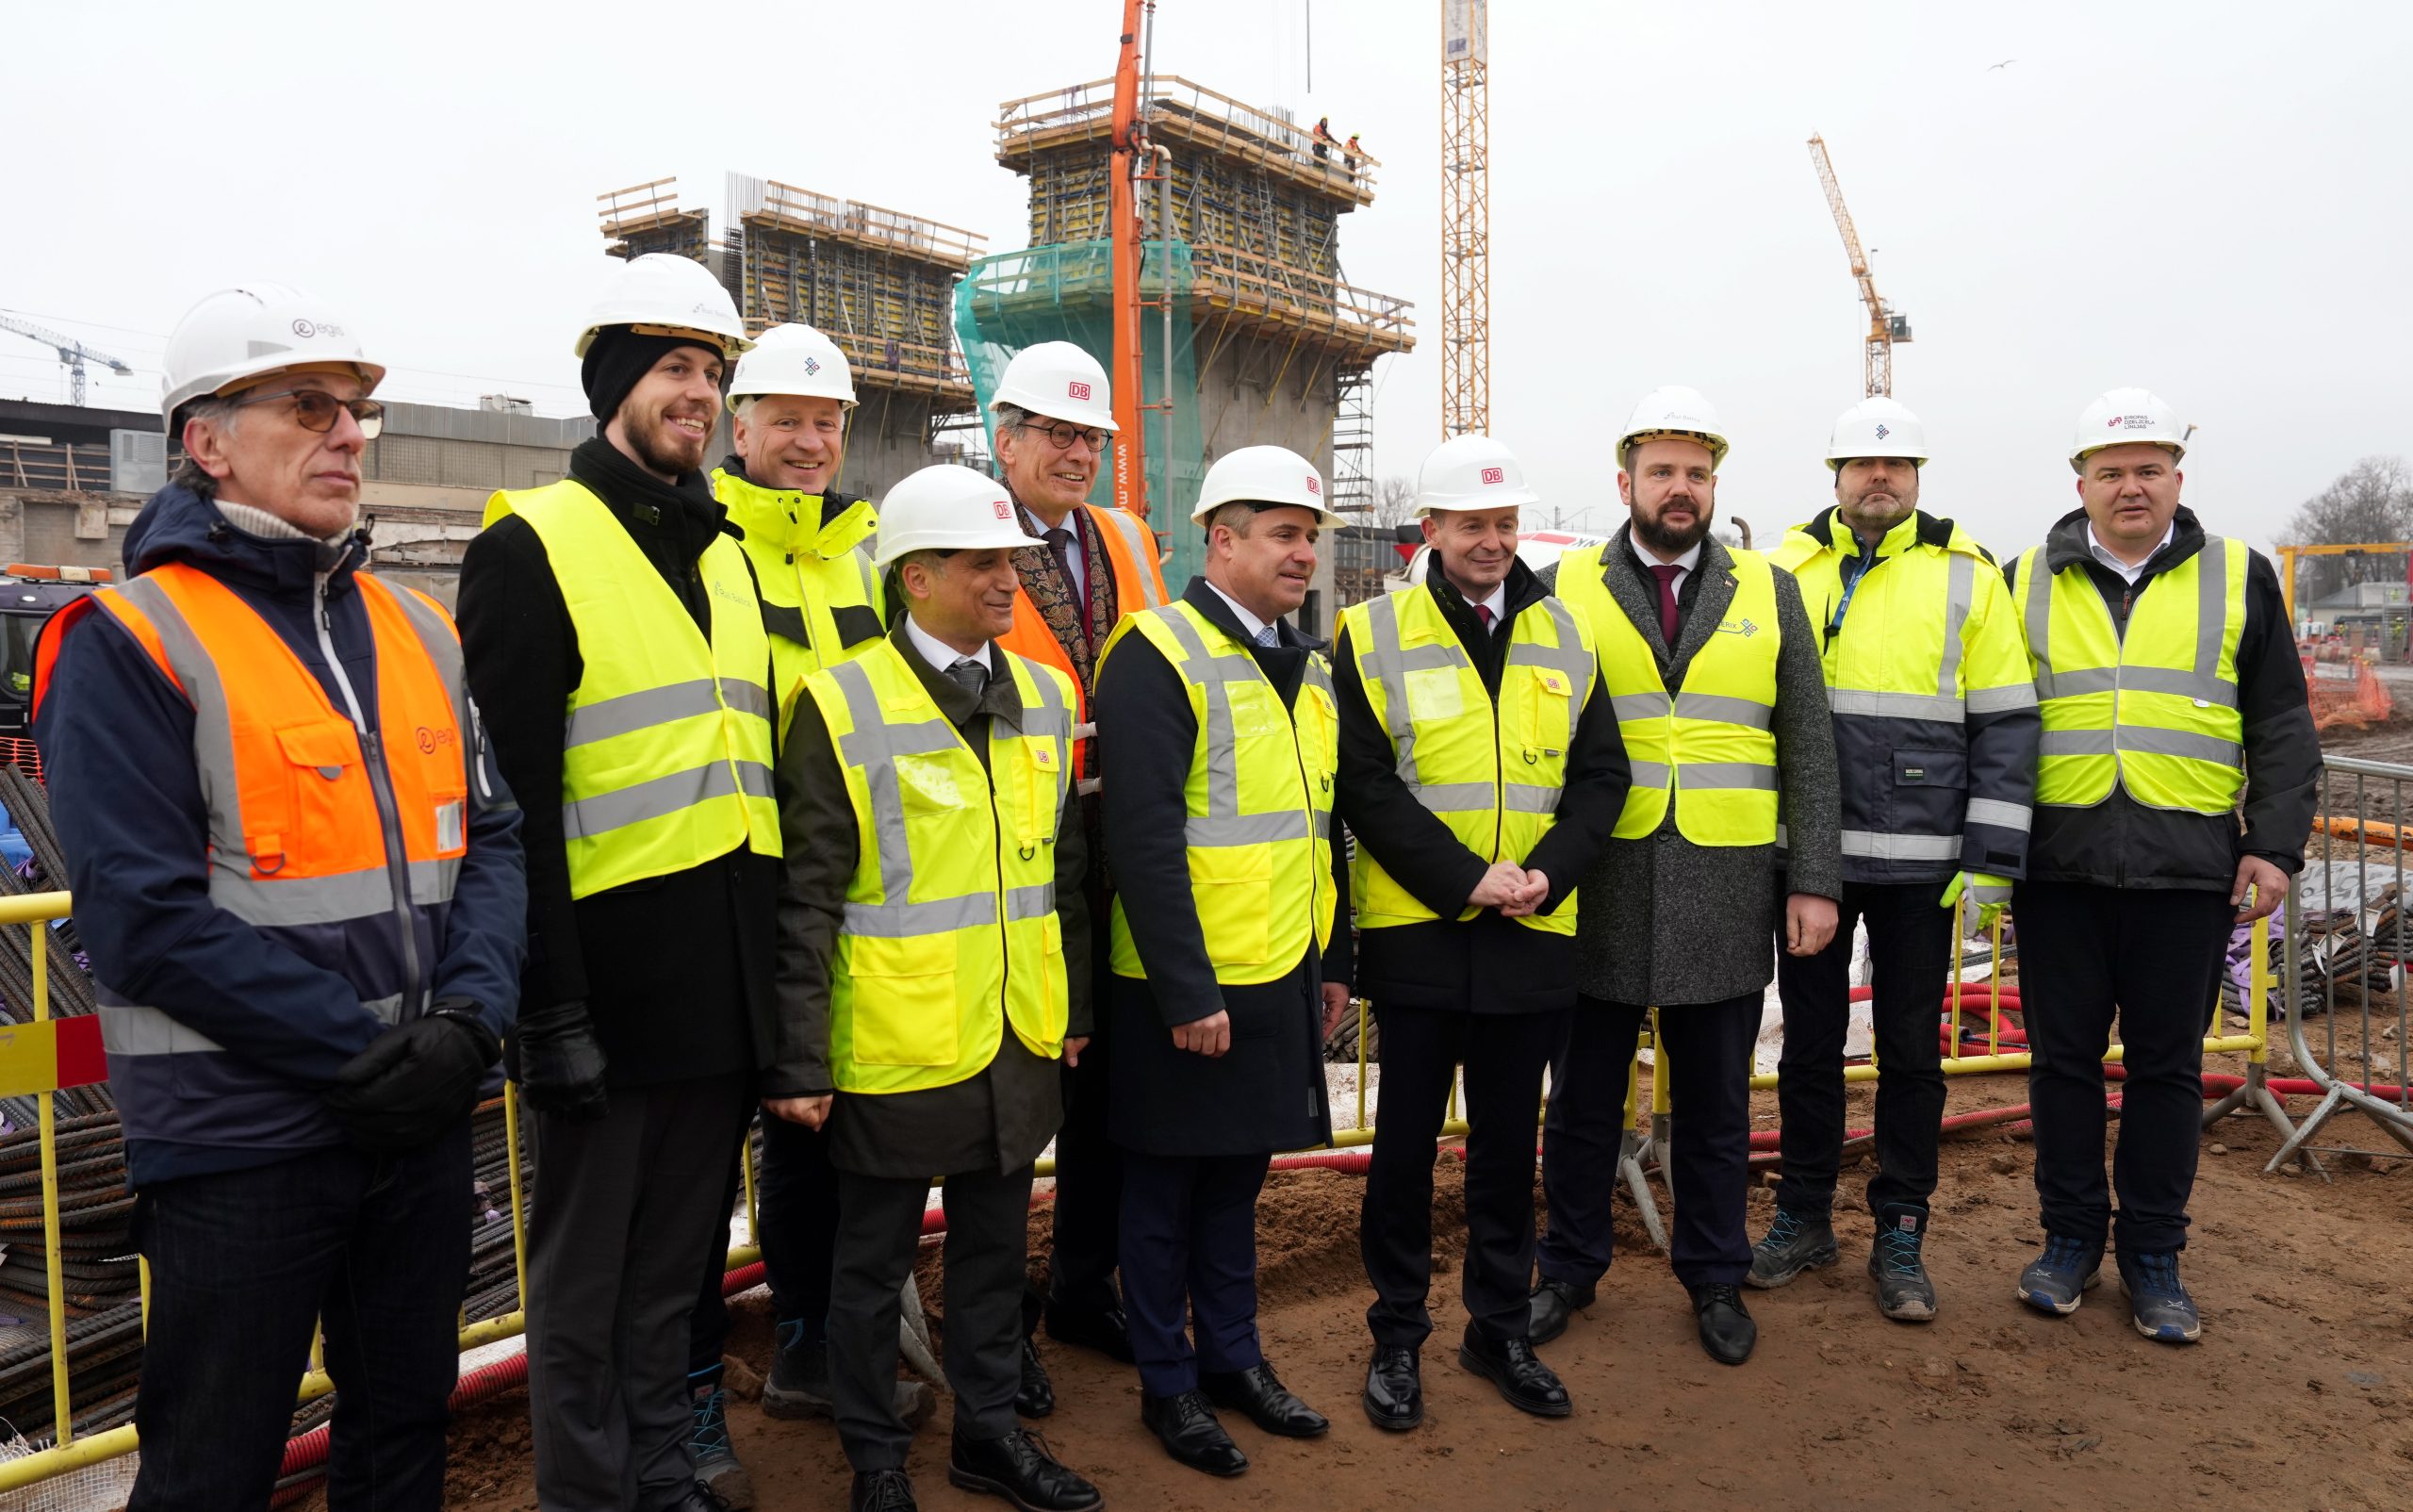 High rank officials including the German Minister of Digital Affairs and Transport Volker Wissing and Jānis Vitenbergs Minister for Transport, Latvia together with Niko Warbanoff and other DB Engineering & Consulting representatives in a group photo